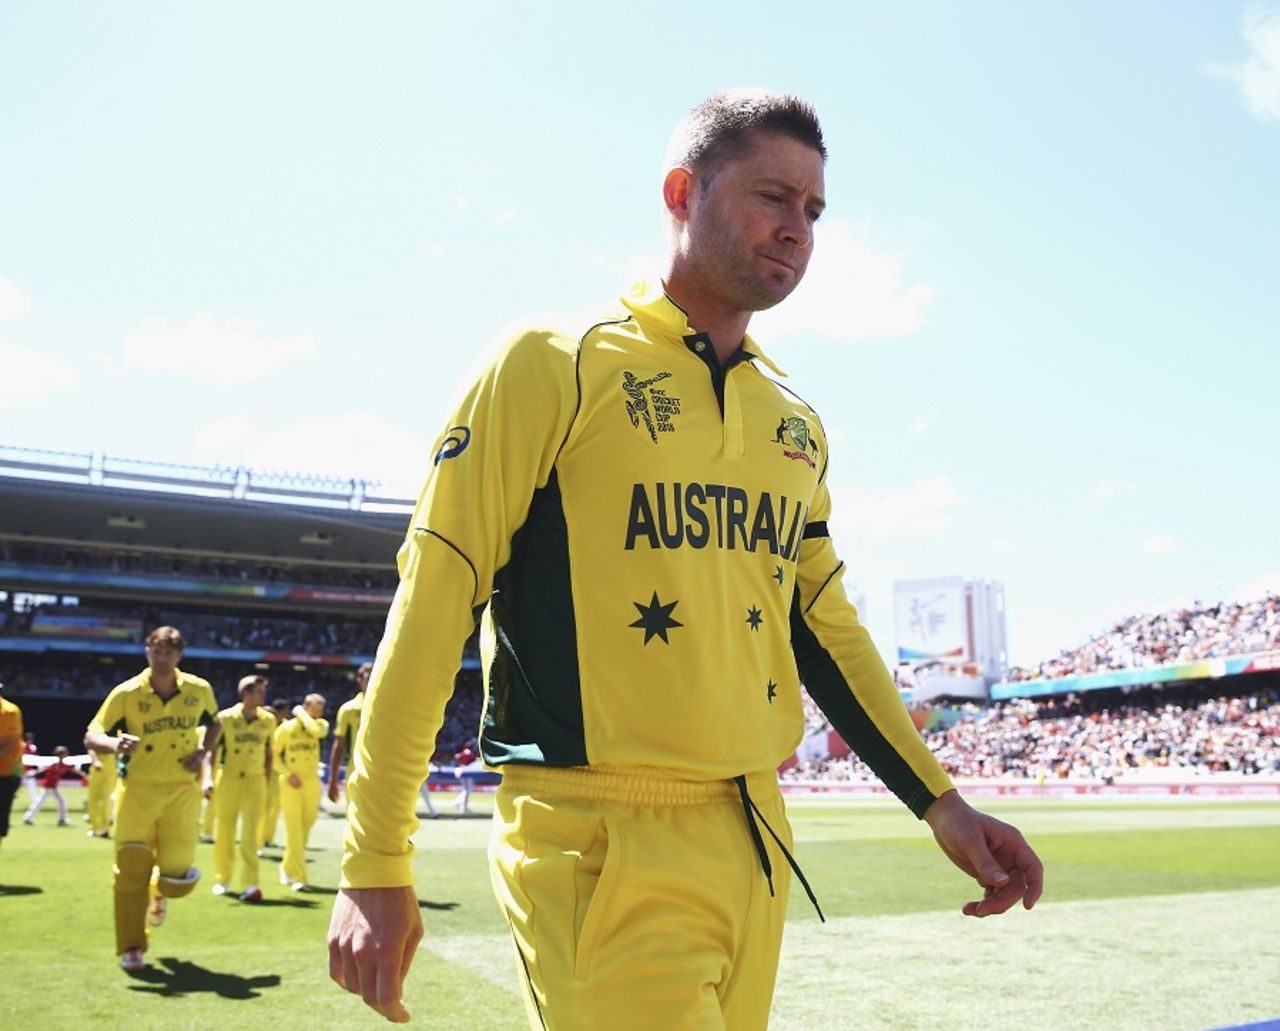 Michael Clarke leads his team onto the field, New Zealand v Australia, World Cup 2015, Group A, Auckland, February 28, 2015